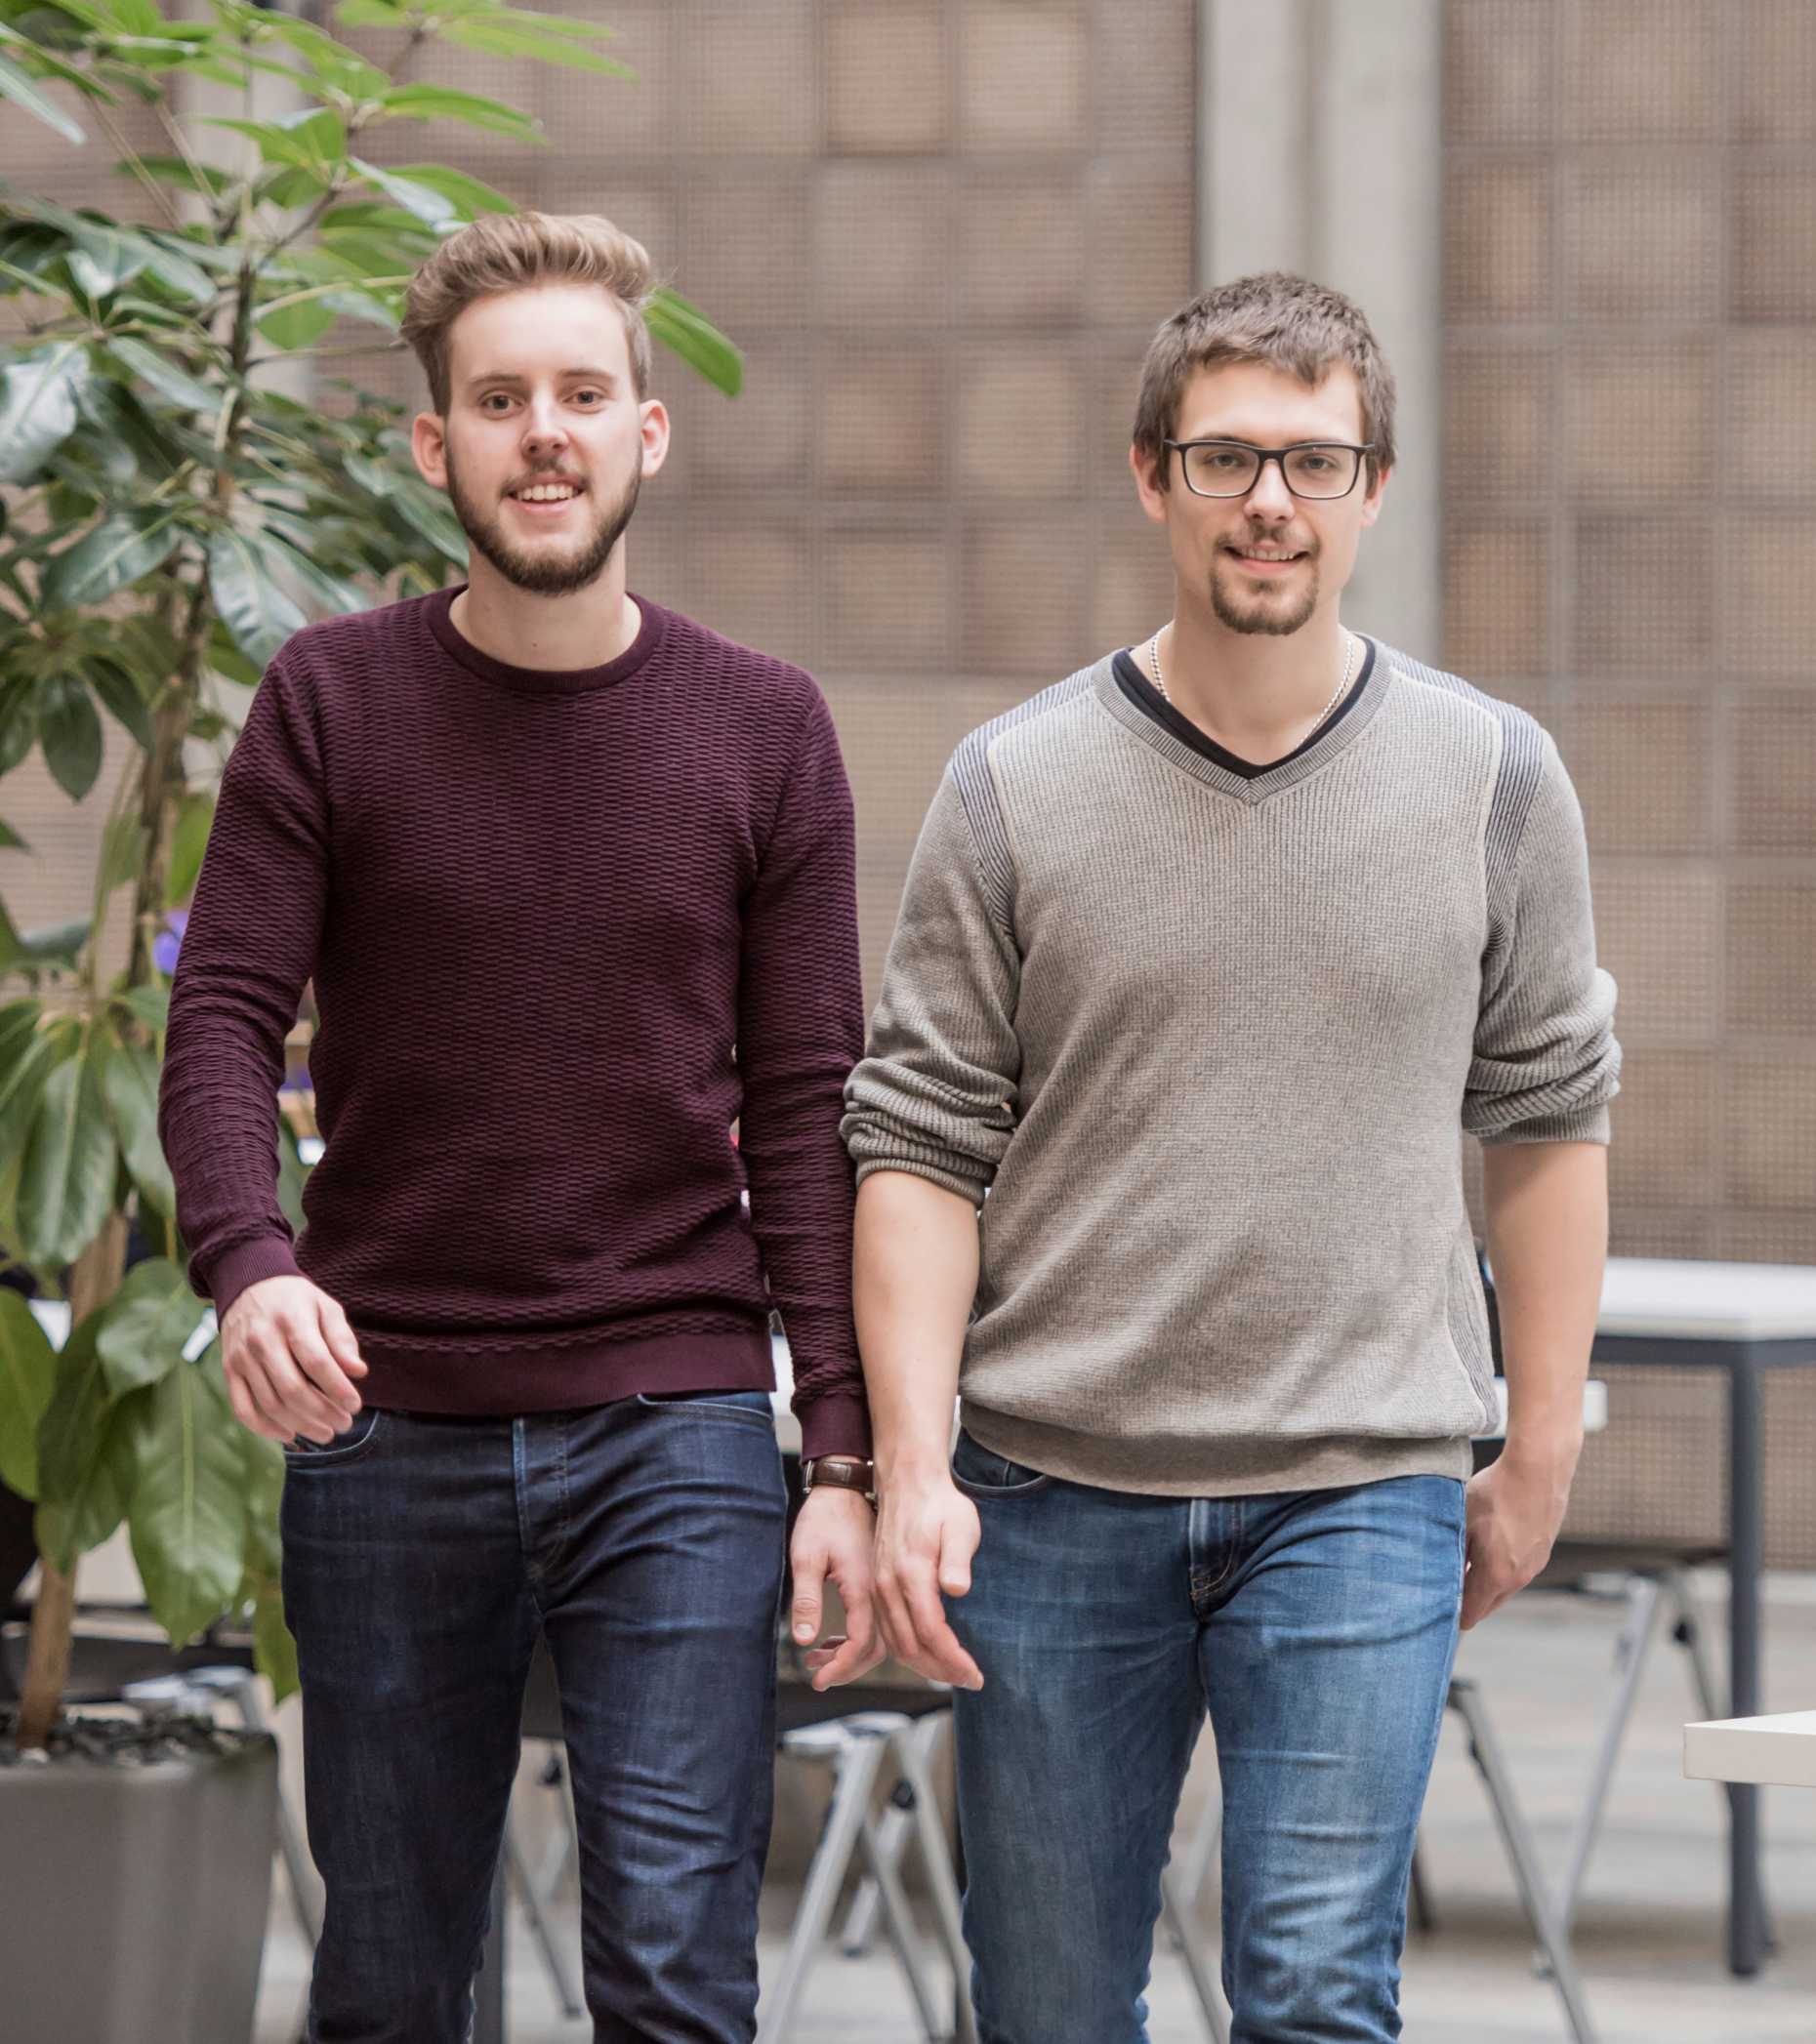 Pioneer Fellows Manuel Heckhorn Ghilardi (left) and Marcel Gort (right), both from ETH department of Mechanical and Process Engineering formed a team to turn basic research into a successful company.